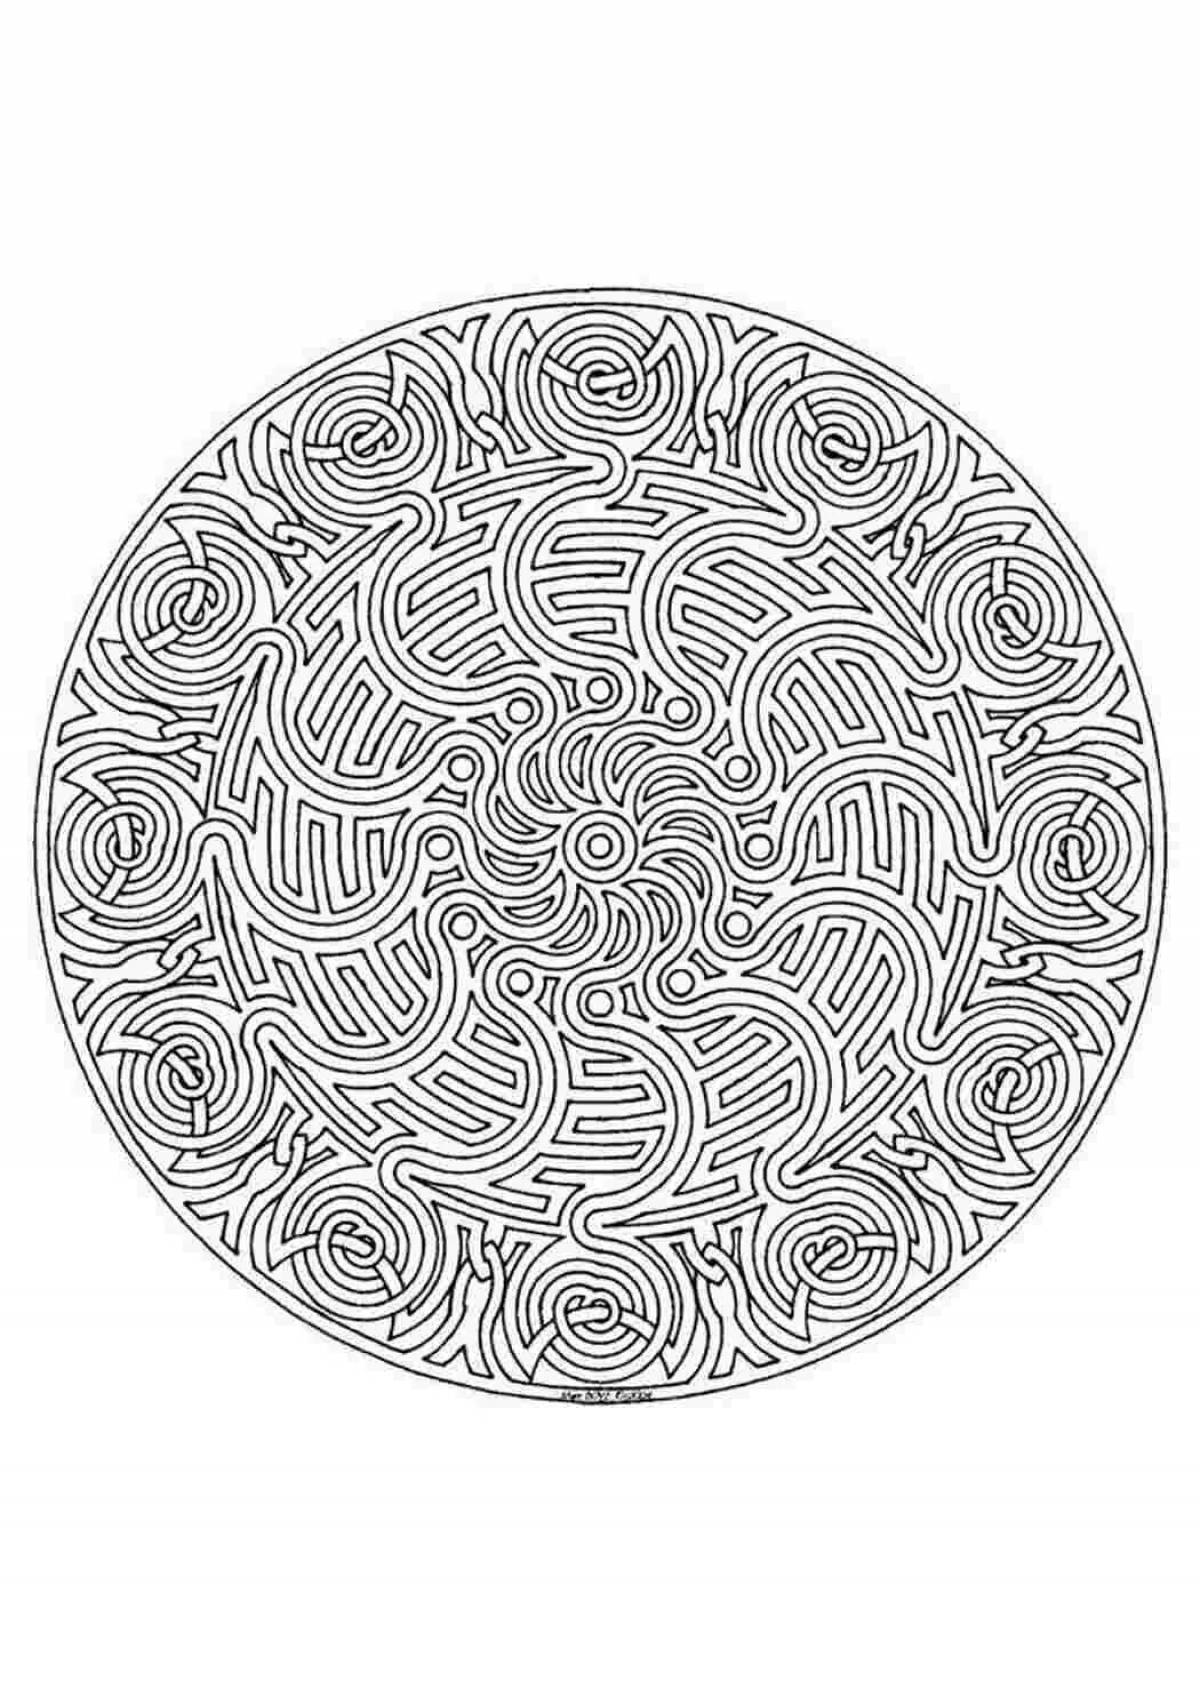 Intricate mandala coloring page is amazing